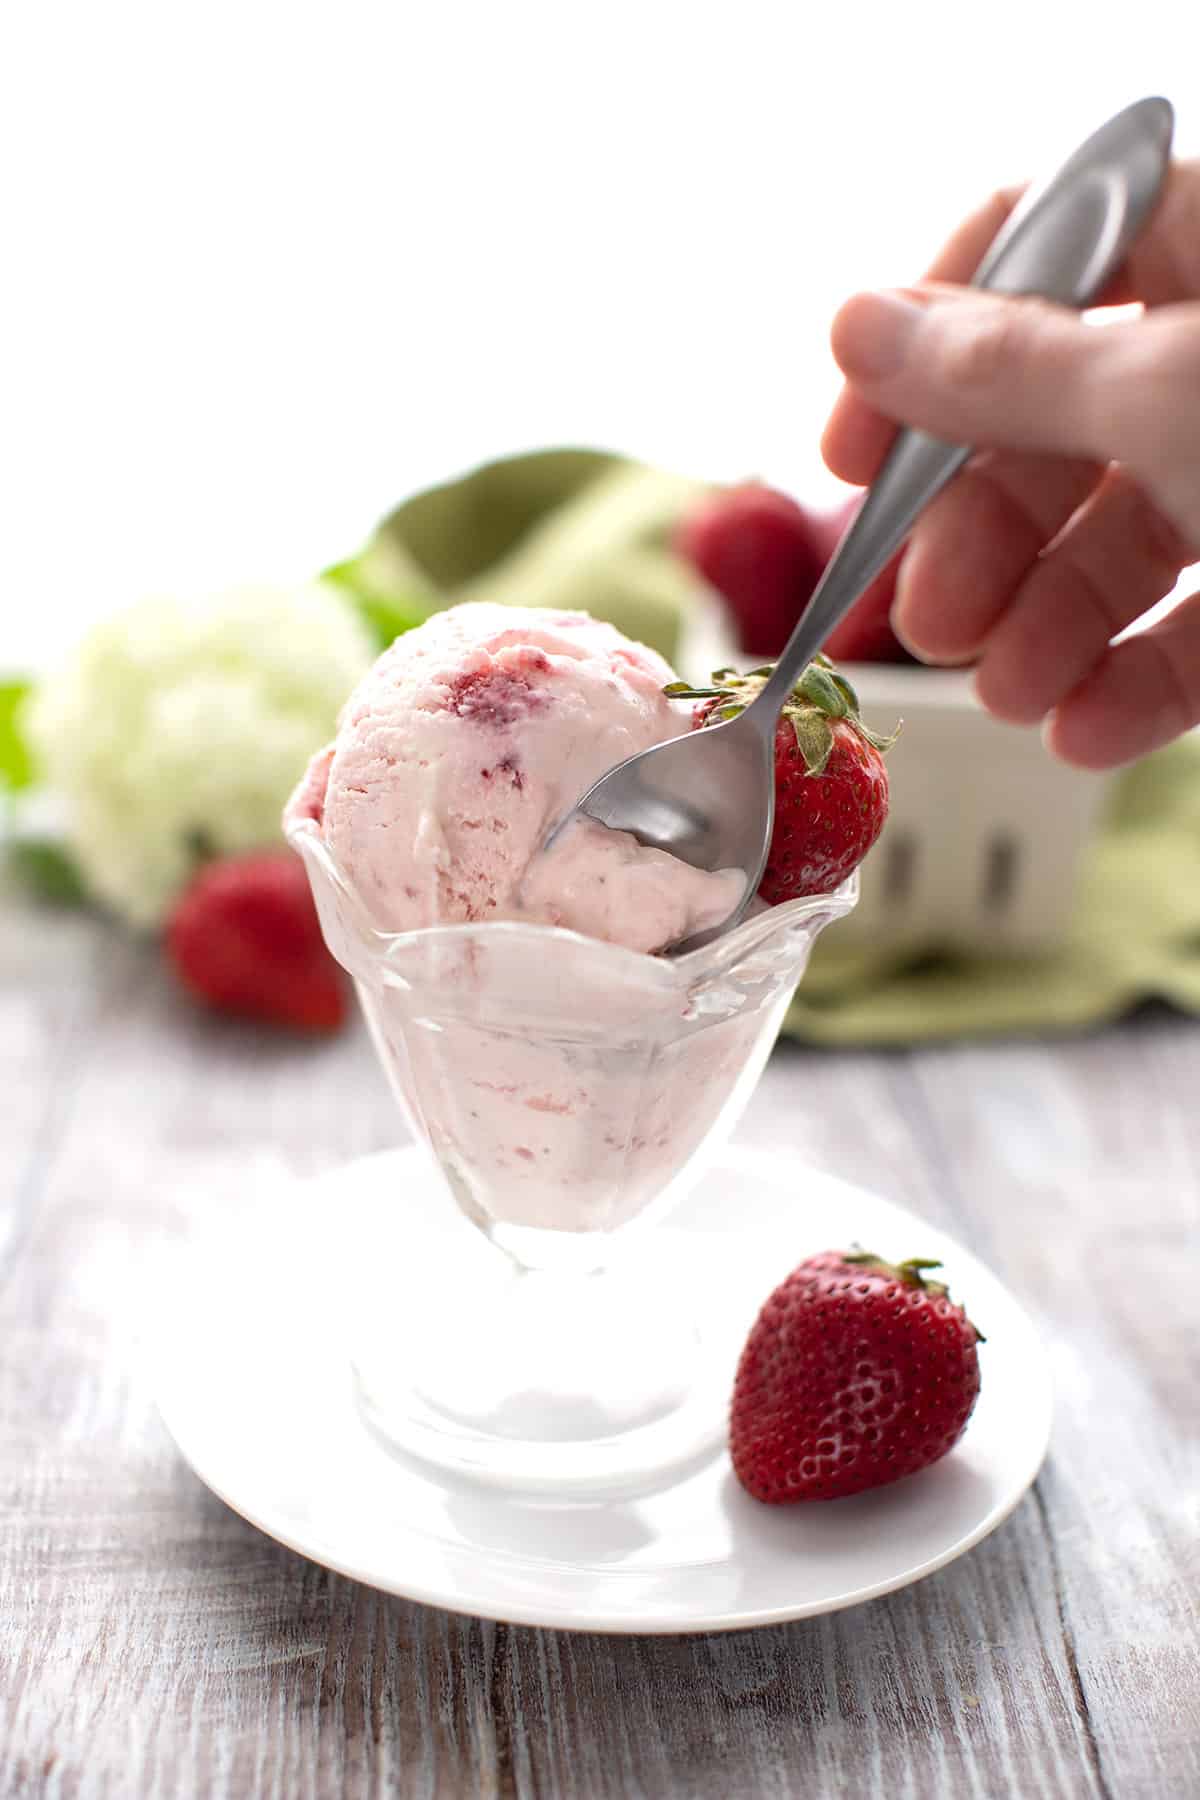 A hand reaching in with a spoon for a bite of strawberry ice cream.